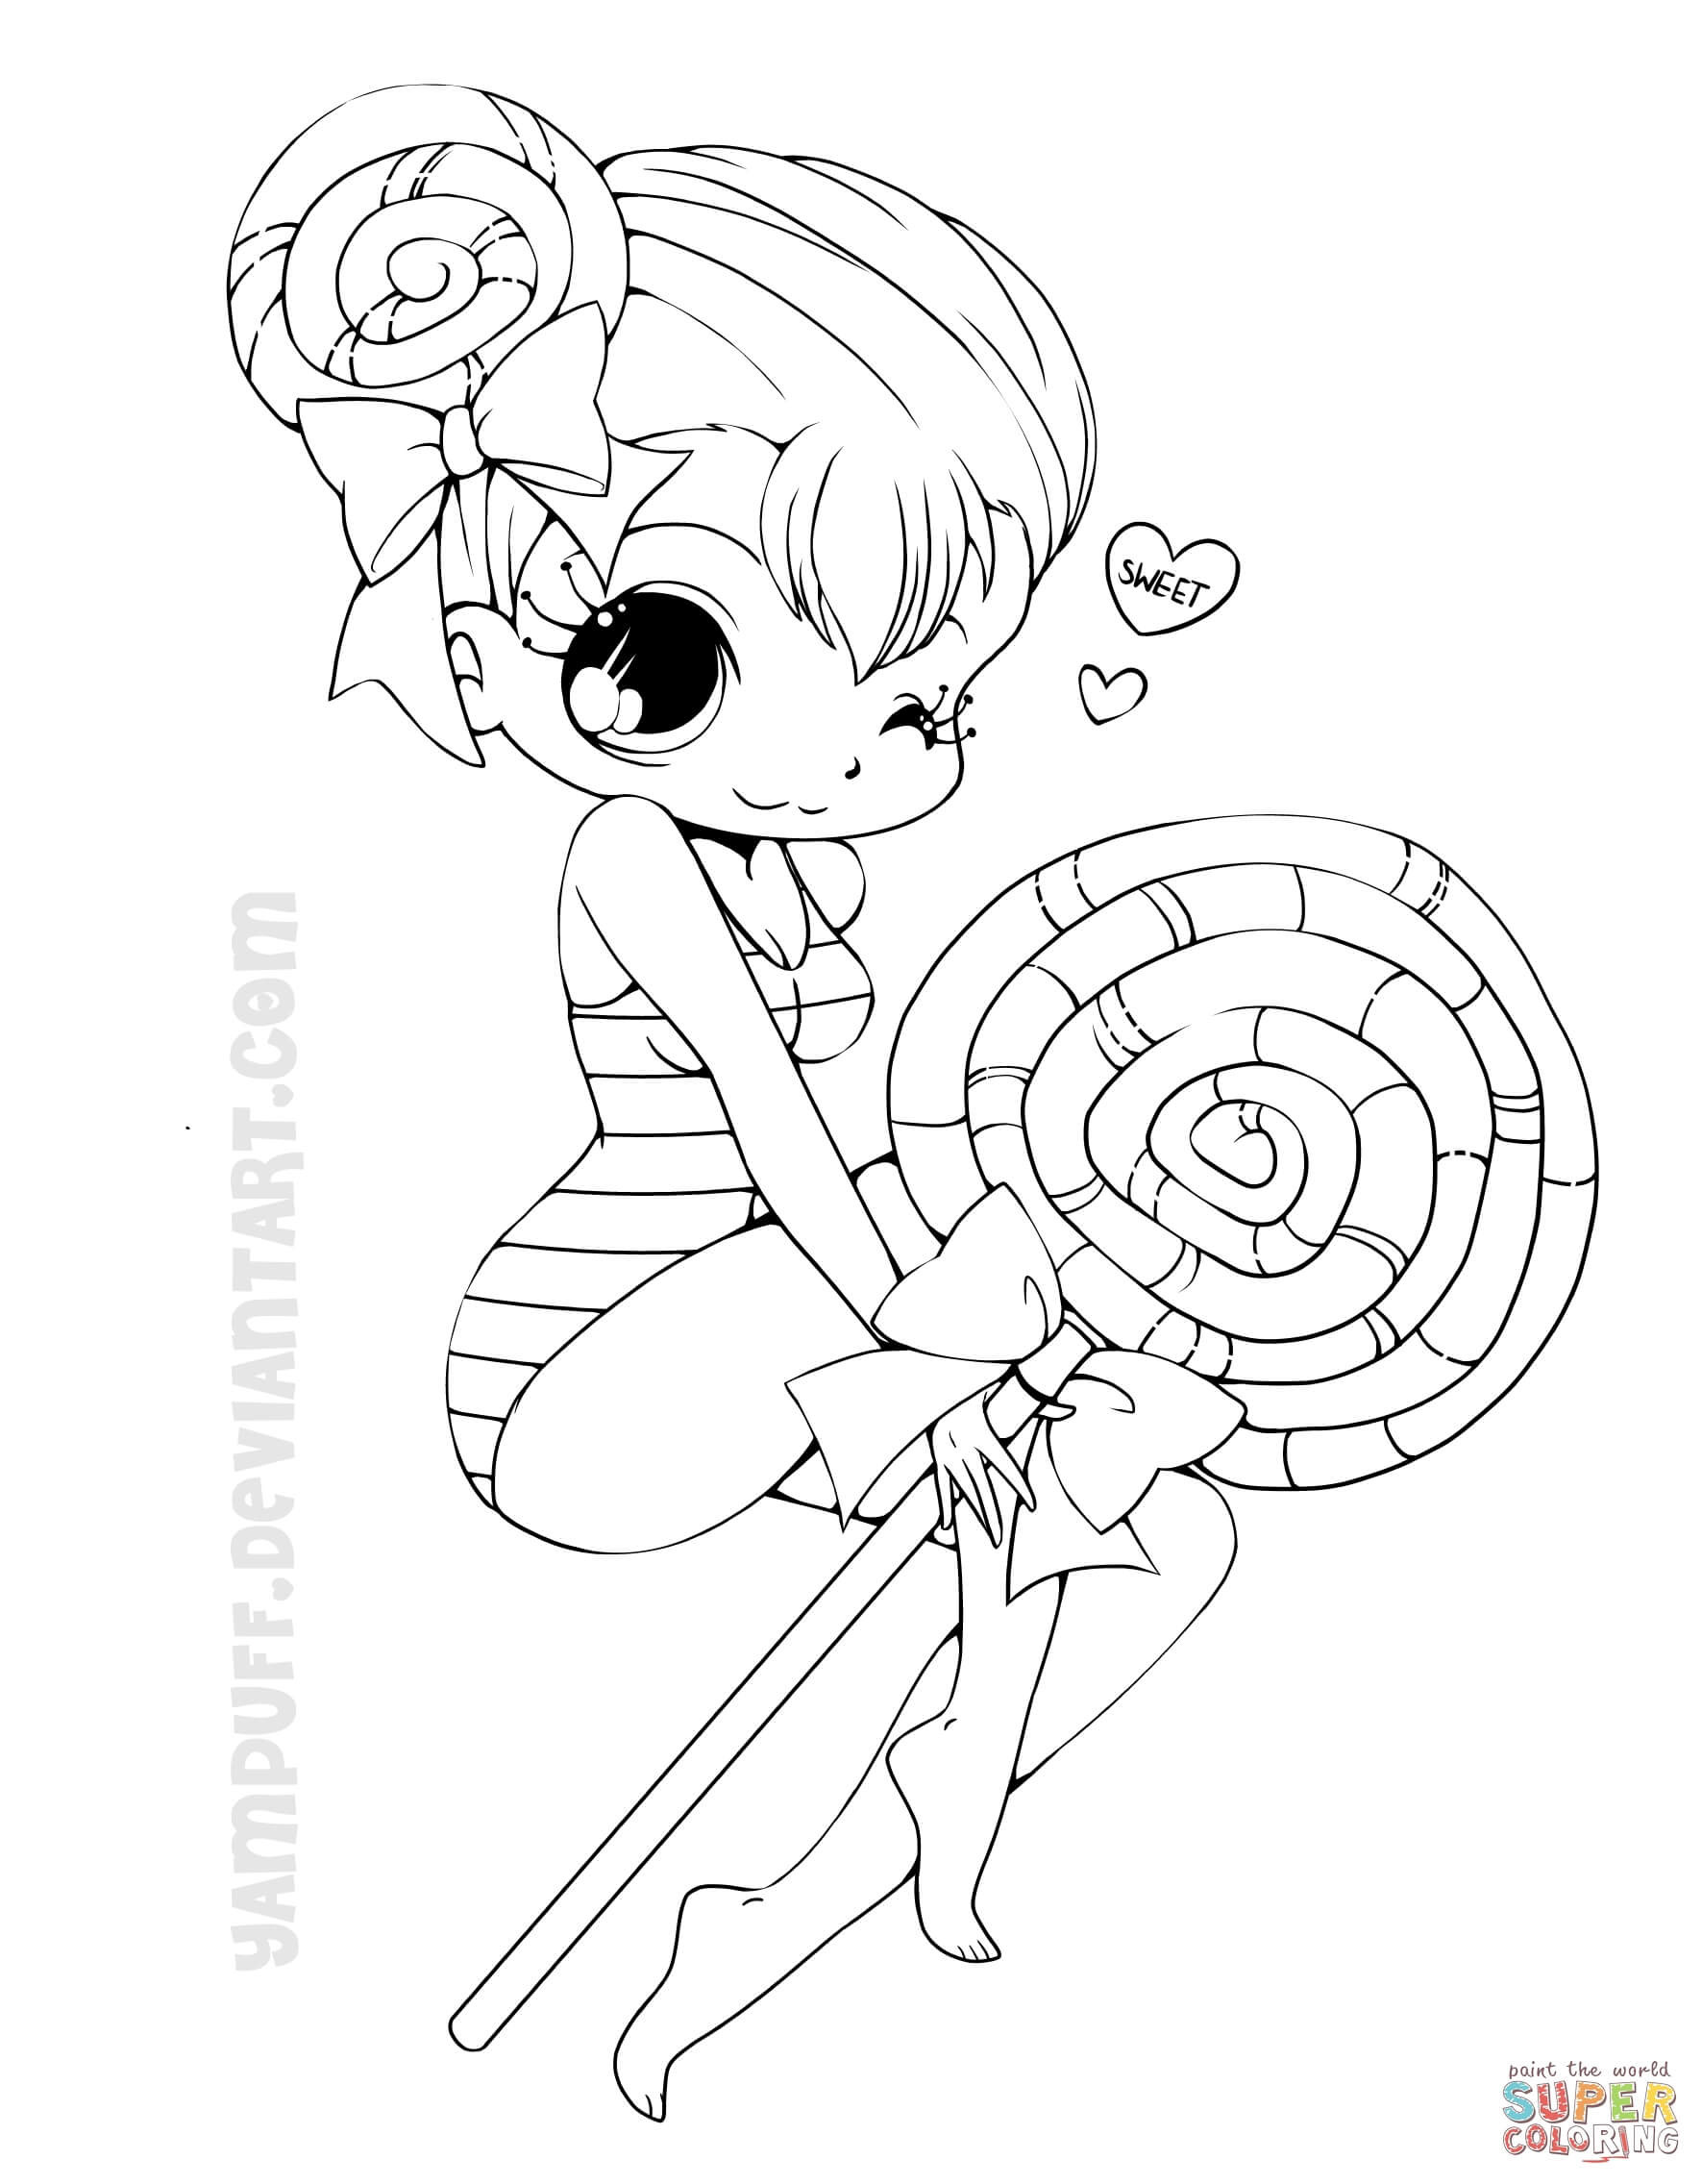 Chibi Anime Girl Coloring Pages
 Chibi Lollipop Girl coloring page